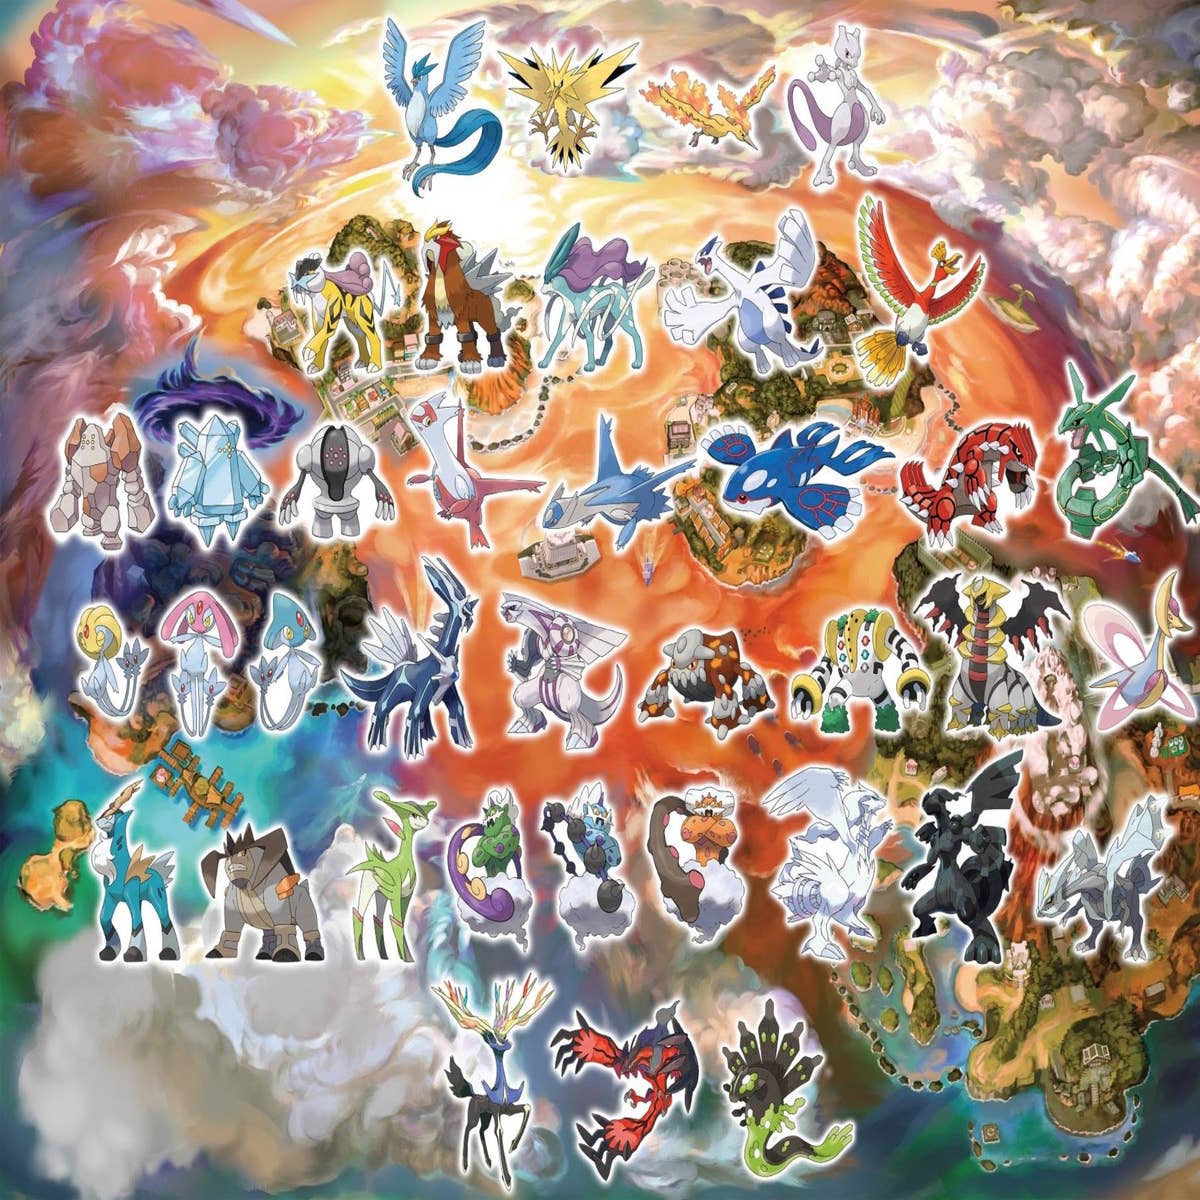 Pokemon Ultra Sun and Ultra Moon Guide - Beginner's Guide, Tips and Tricks,  Ultra Beasts, New Z-Moves, Alola Photo Club Guide, How to Farm Money  Quickly